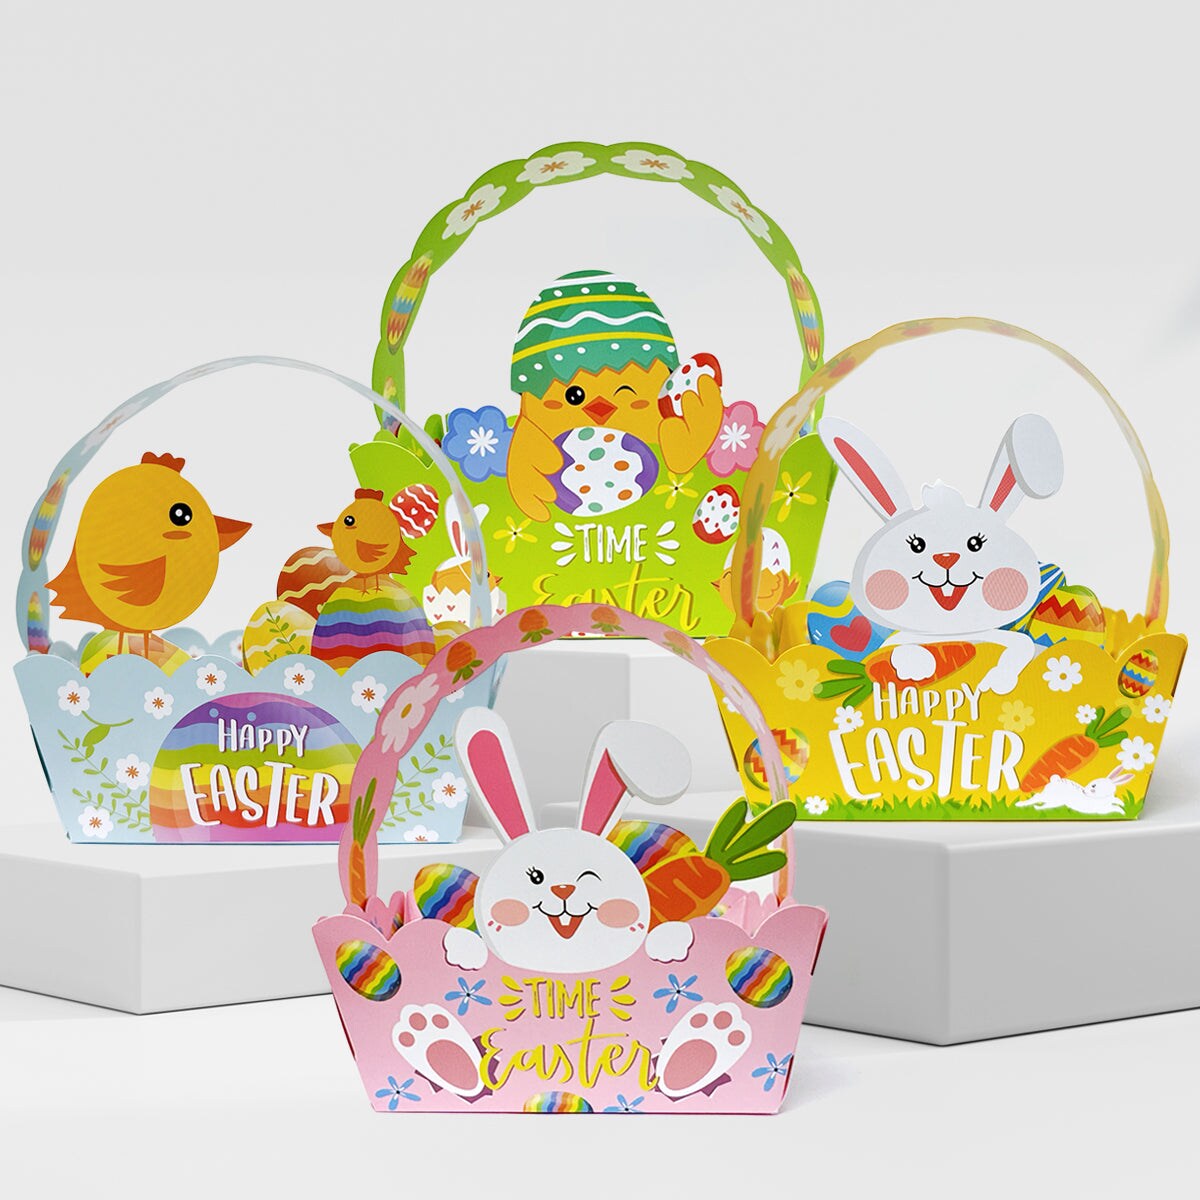 Wrapables Easter Gift Baskets with Handle, Treat Boxes for Eggs, Cookies and Candy, Set of 12, Vibrant Easter Eggs